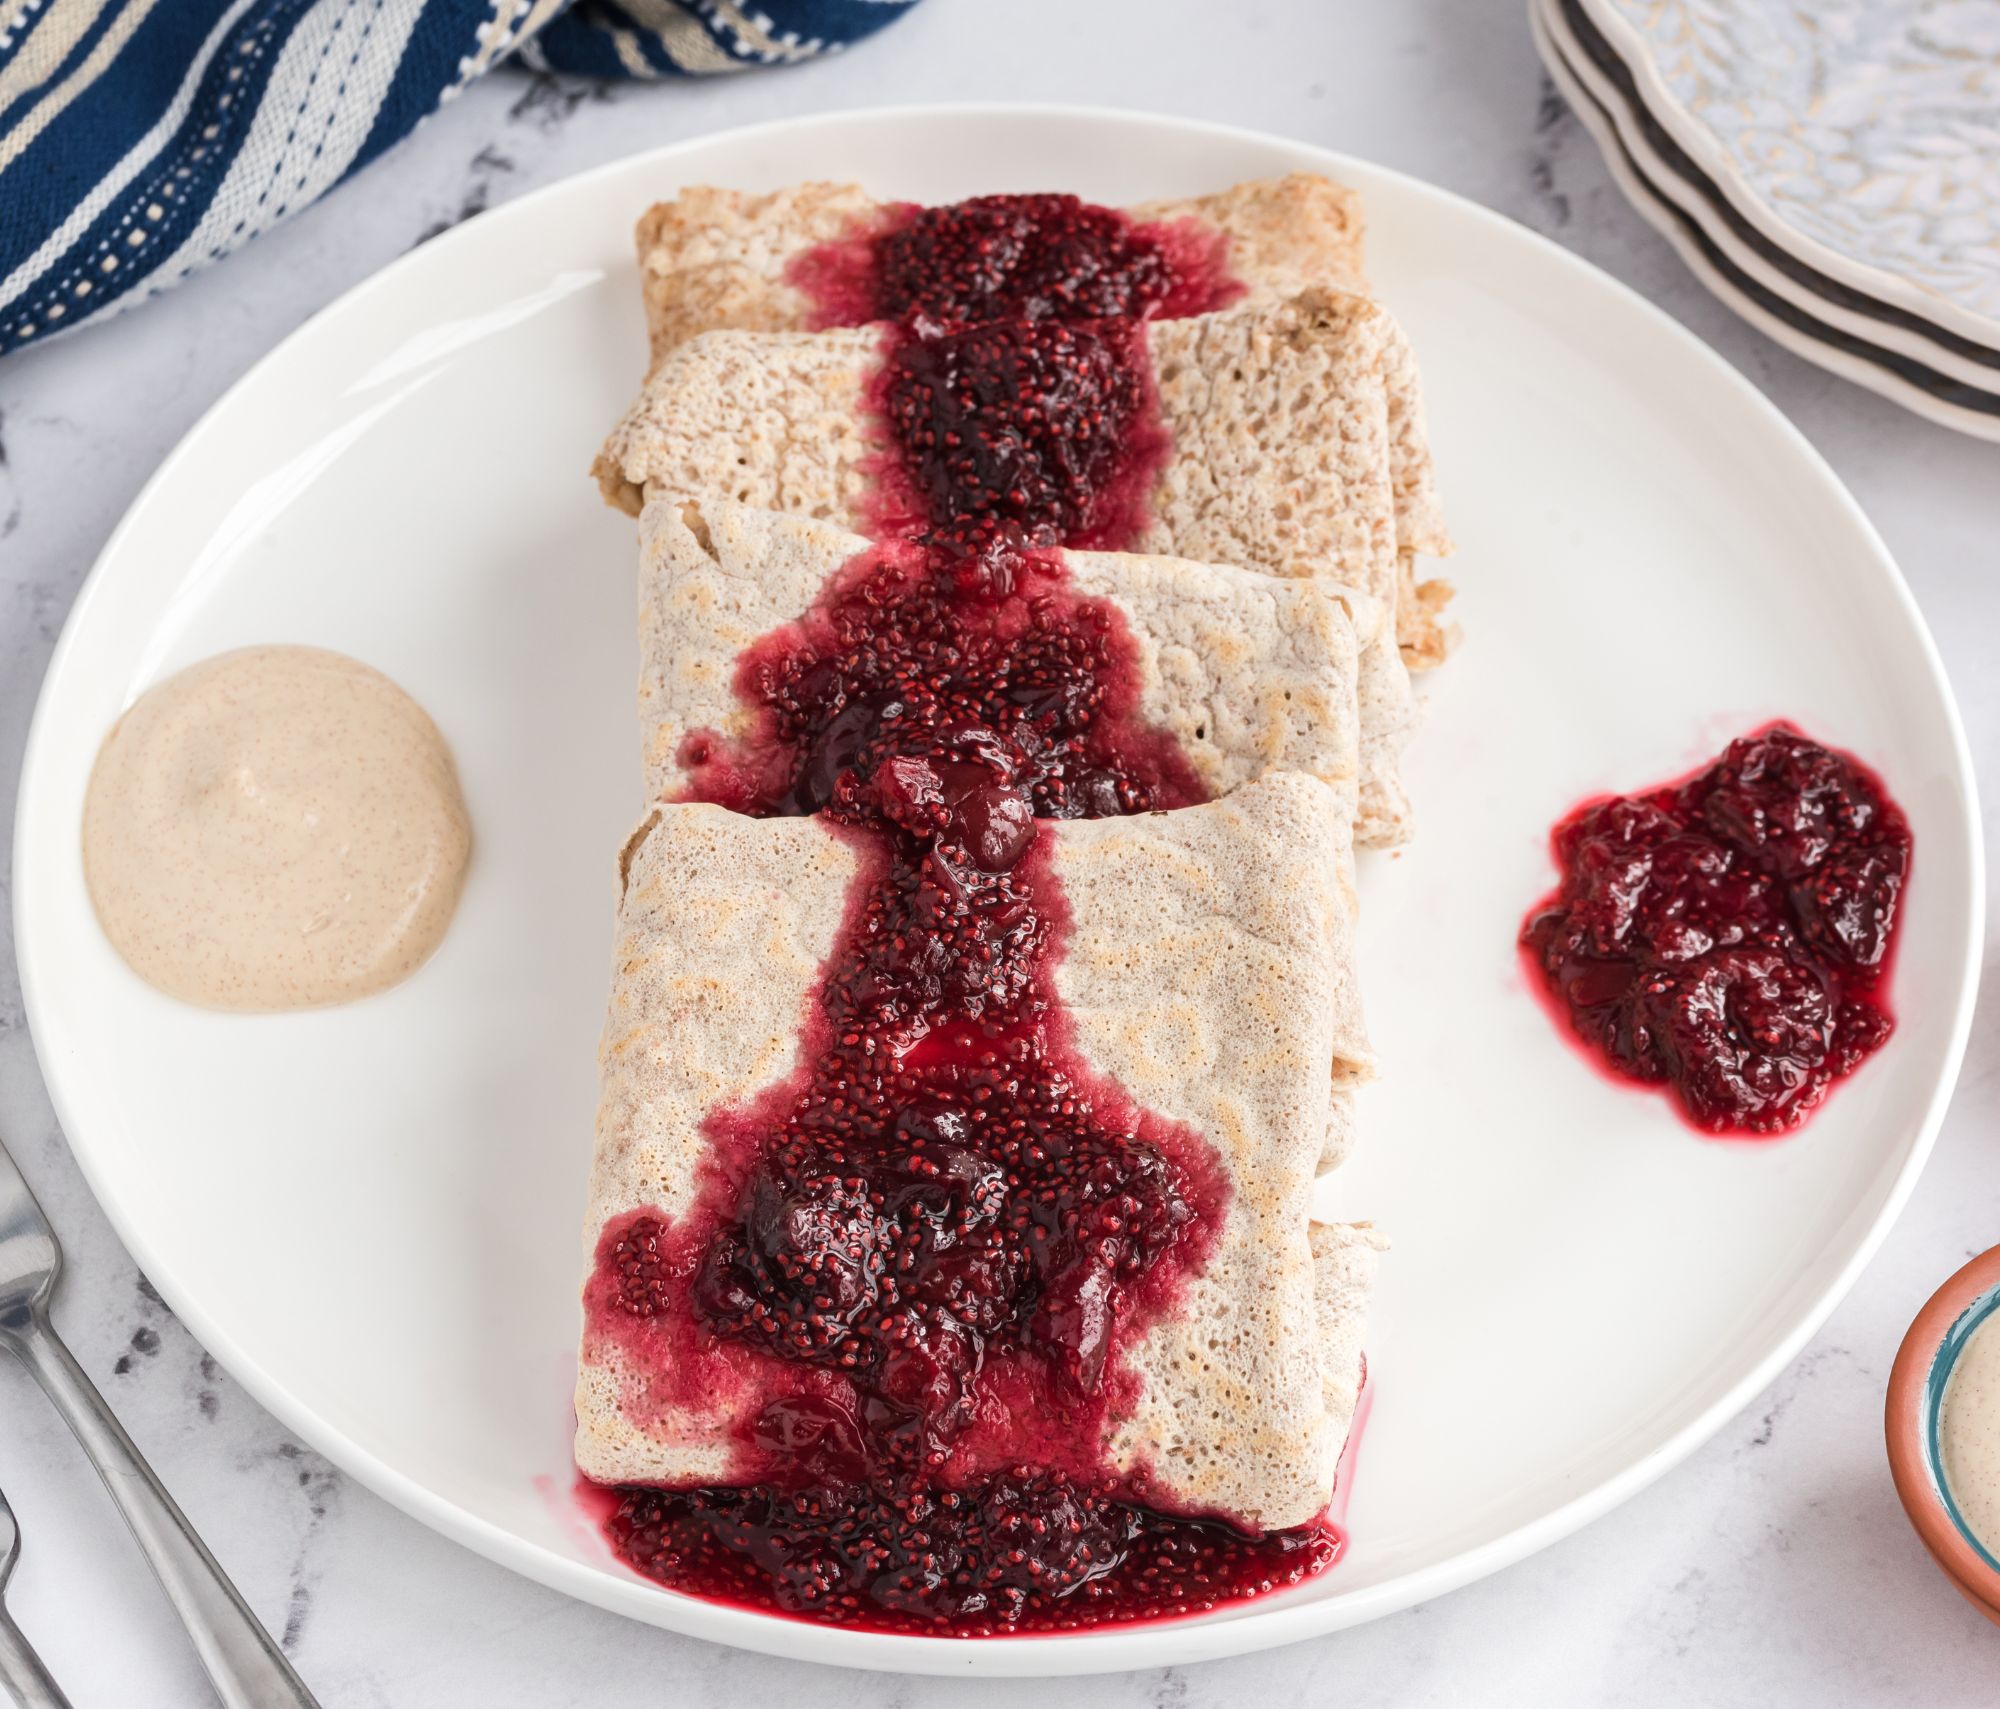 Cherry Vanilla Crepes with a jam topping cascading across the dessert